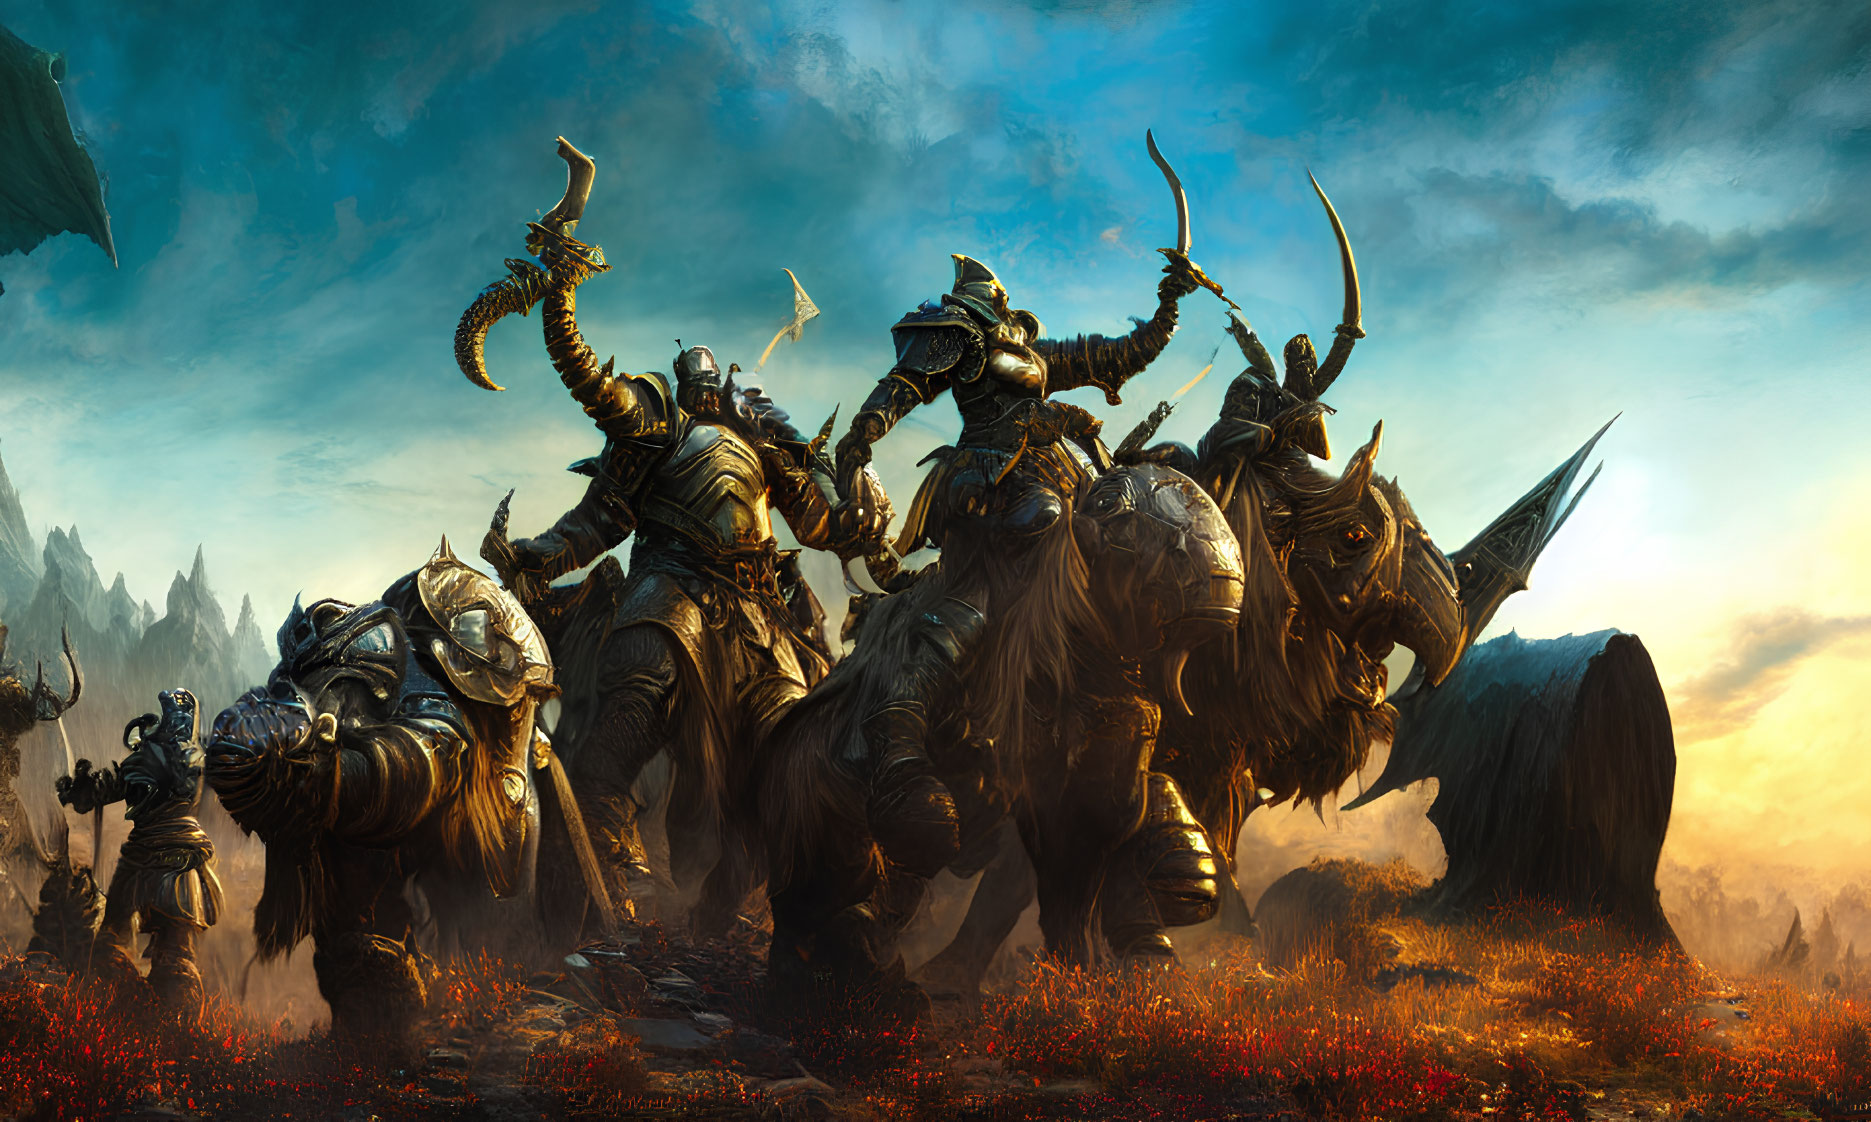 Armored warriors on rhinoceros-like creatures in dramatic fantasy landscape